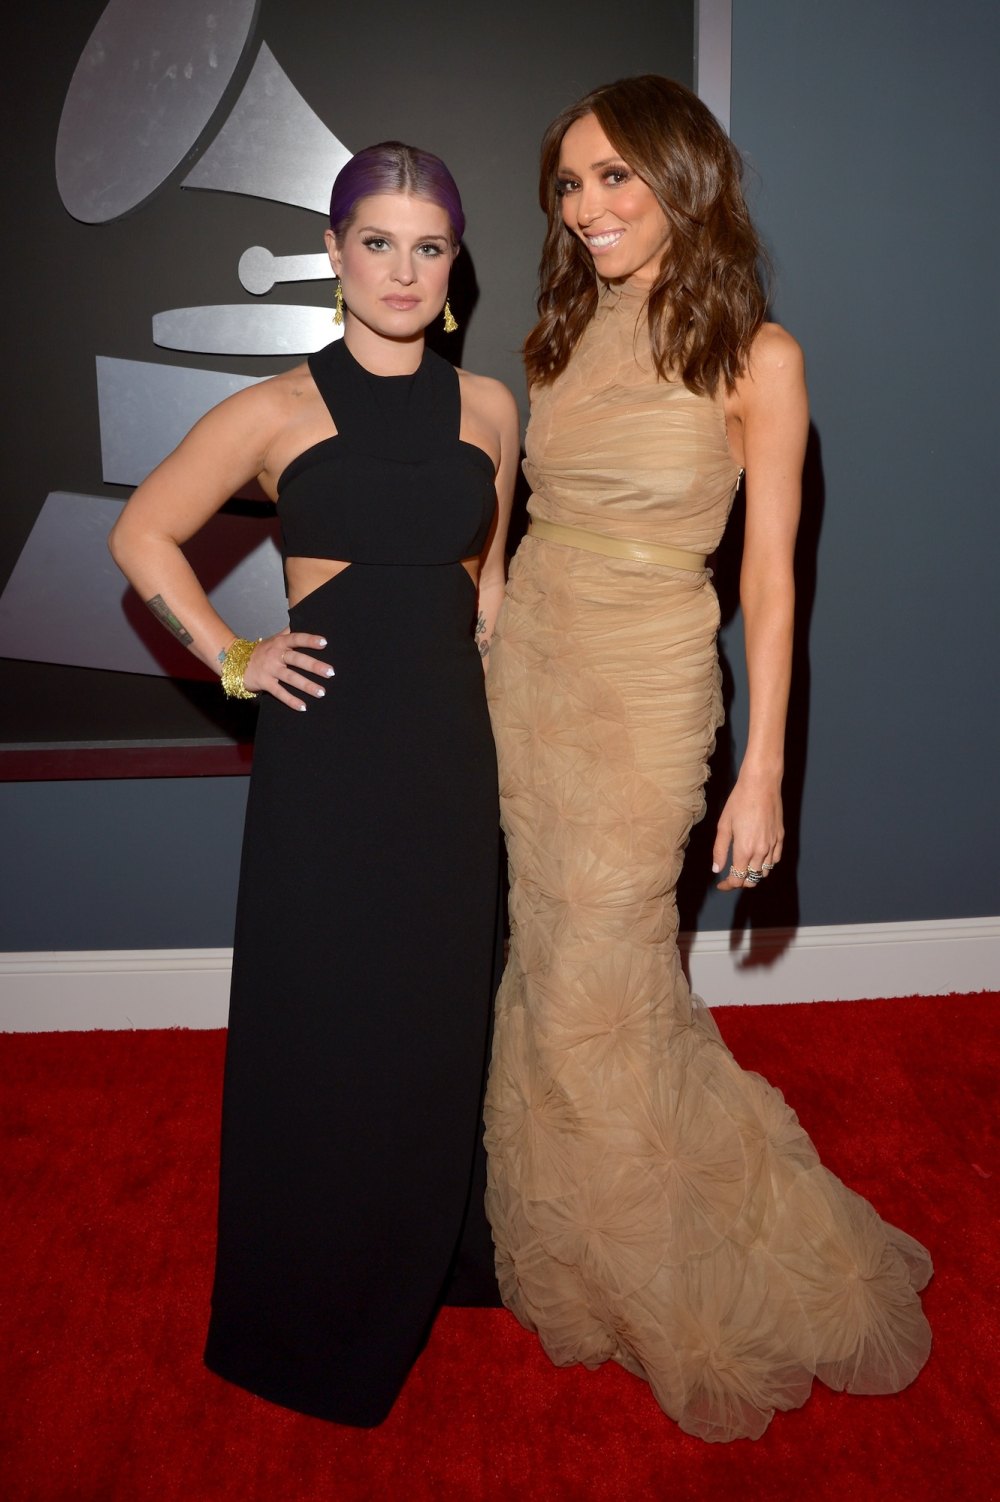 GettyImages-161385956-Kelly Osbourne and Giuliana Rancic at GRAMMY awards